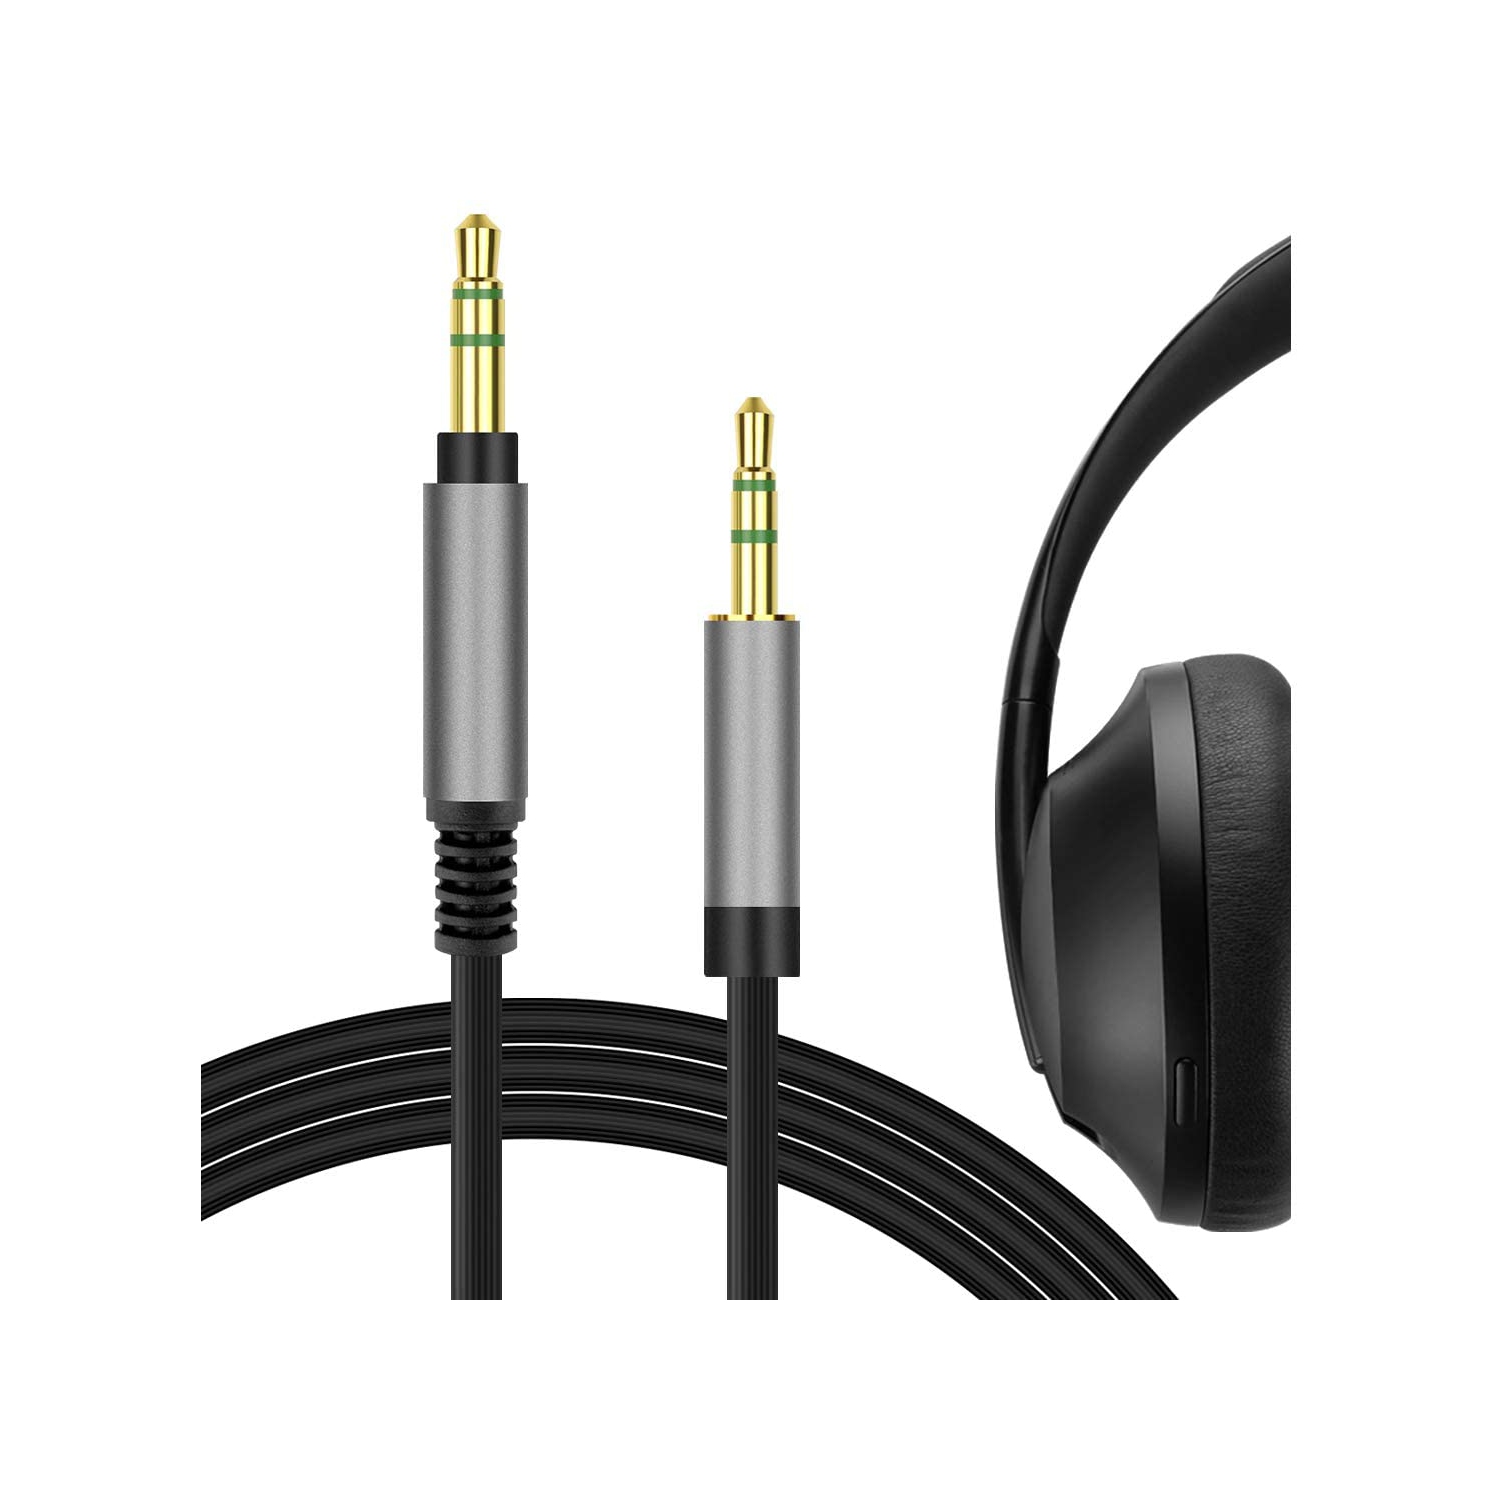 QuickFit Audio Cable Compatible with Bose QC 45, QuietComfort 35 II, QC 35, QC 25, 700 ANC, NC 700 Cable, 2.5mm